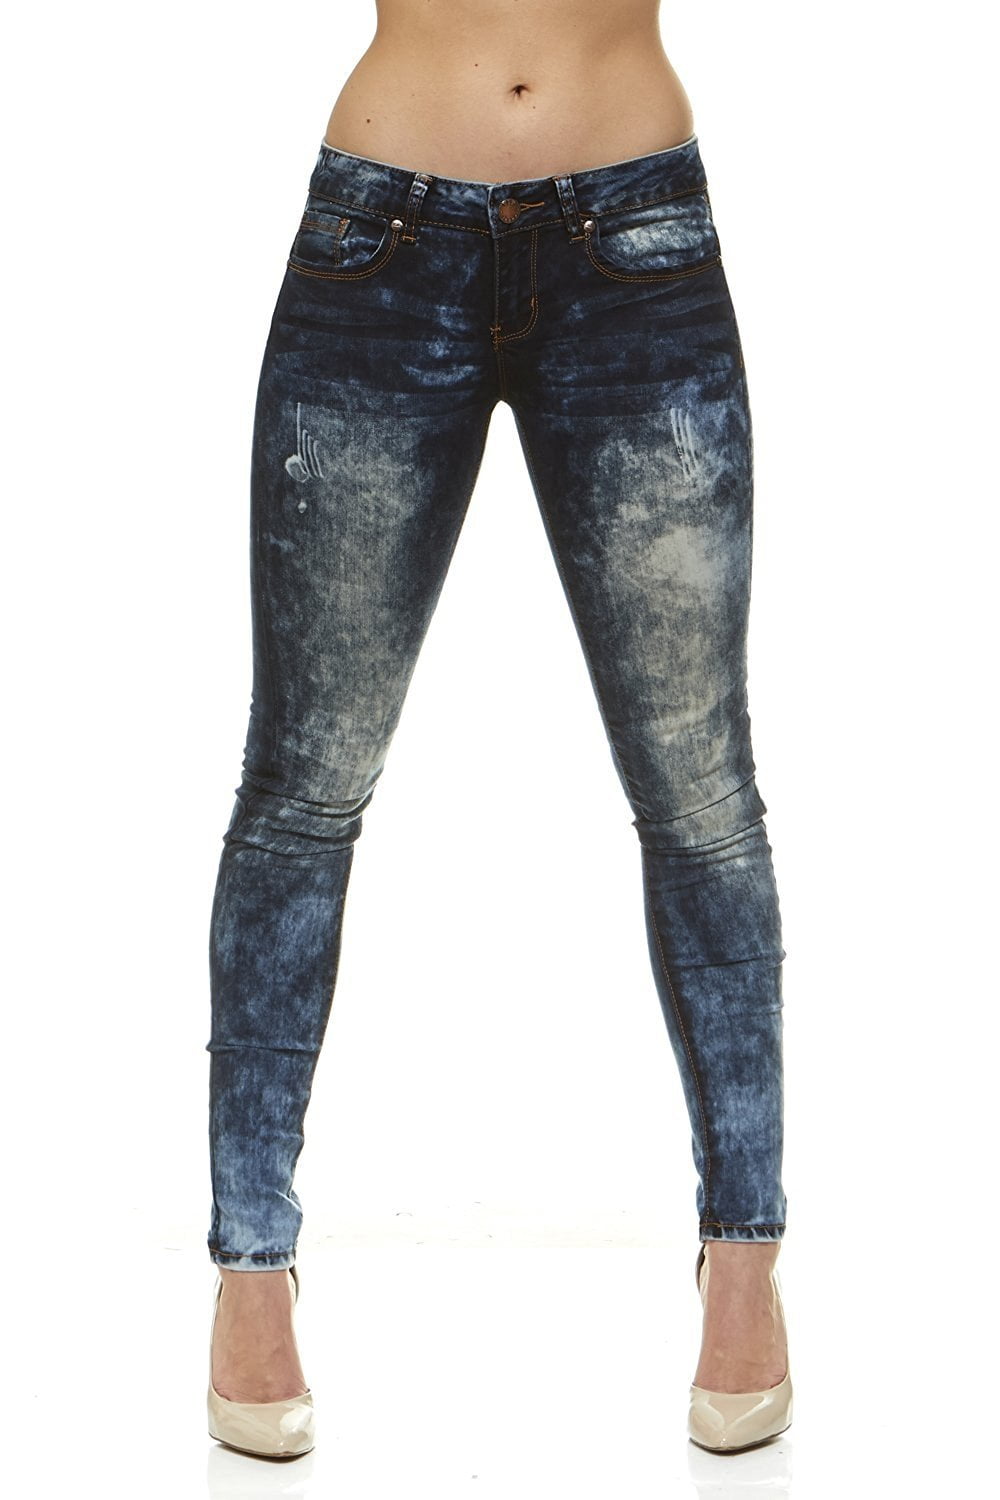 Juniors Skinny Sizes Washed 7 Women Blue for Jeans Stretch Classic Stone Electric Fit Slim Jeans